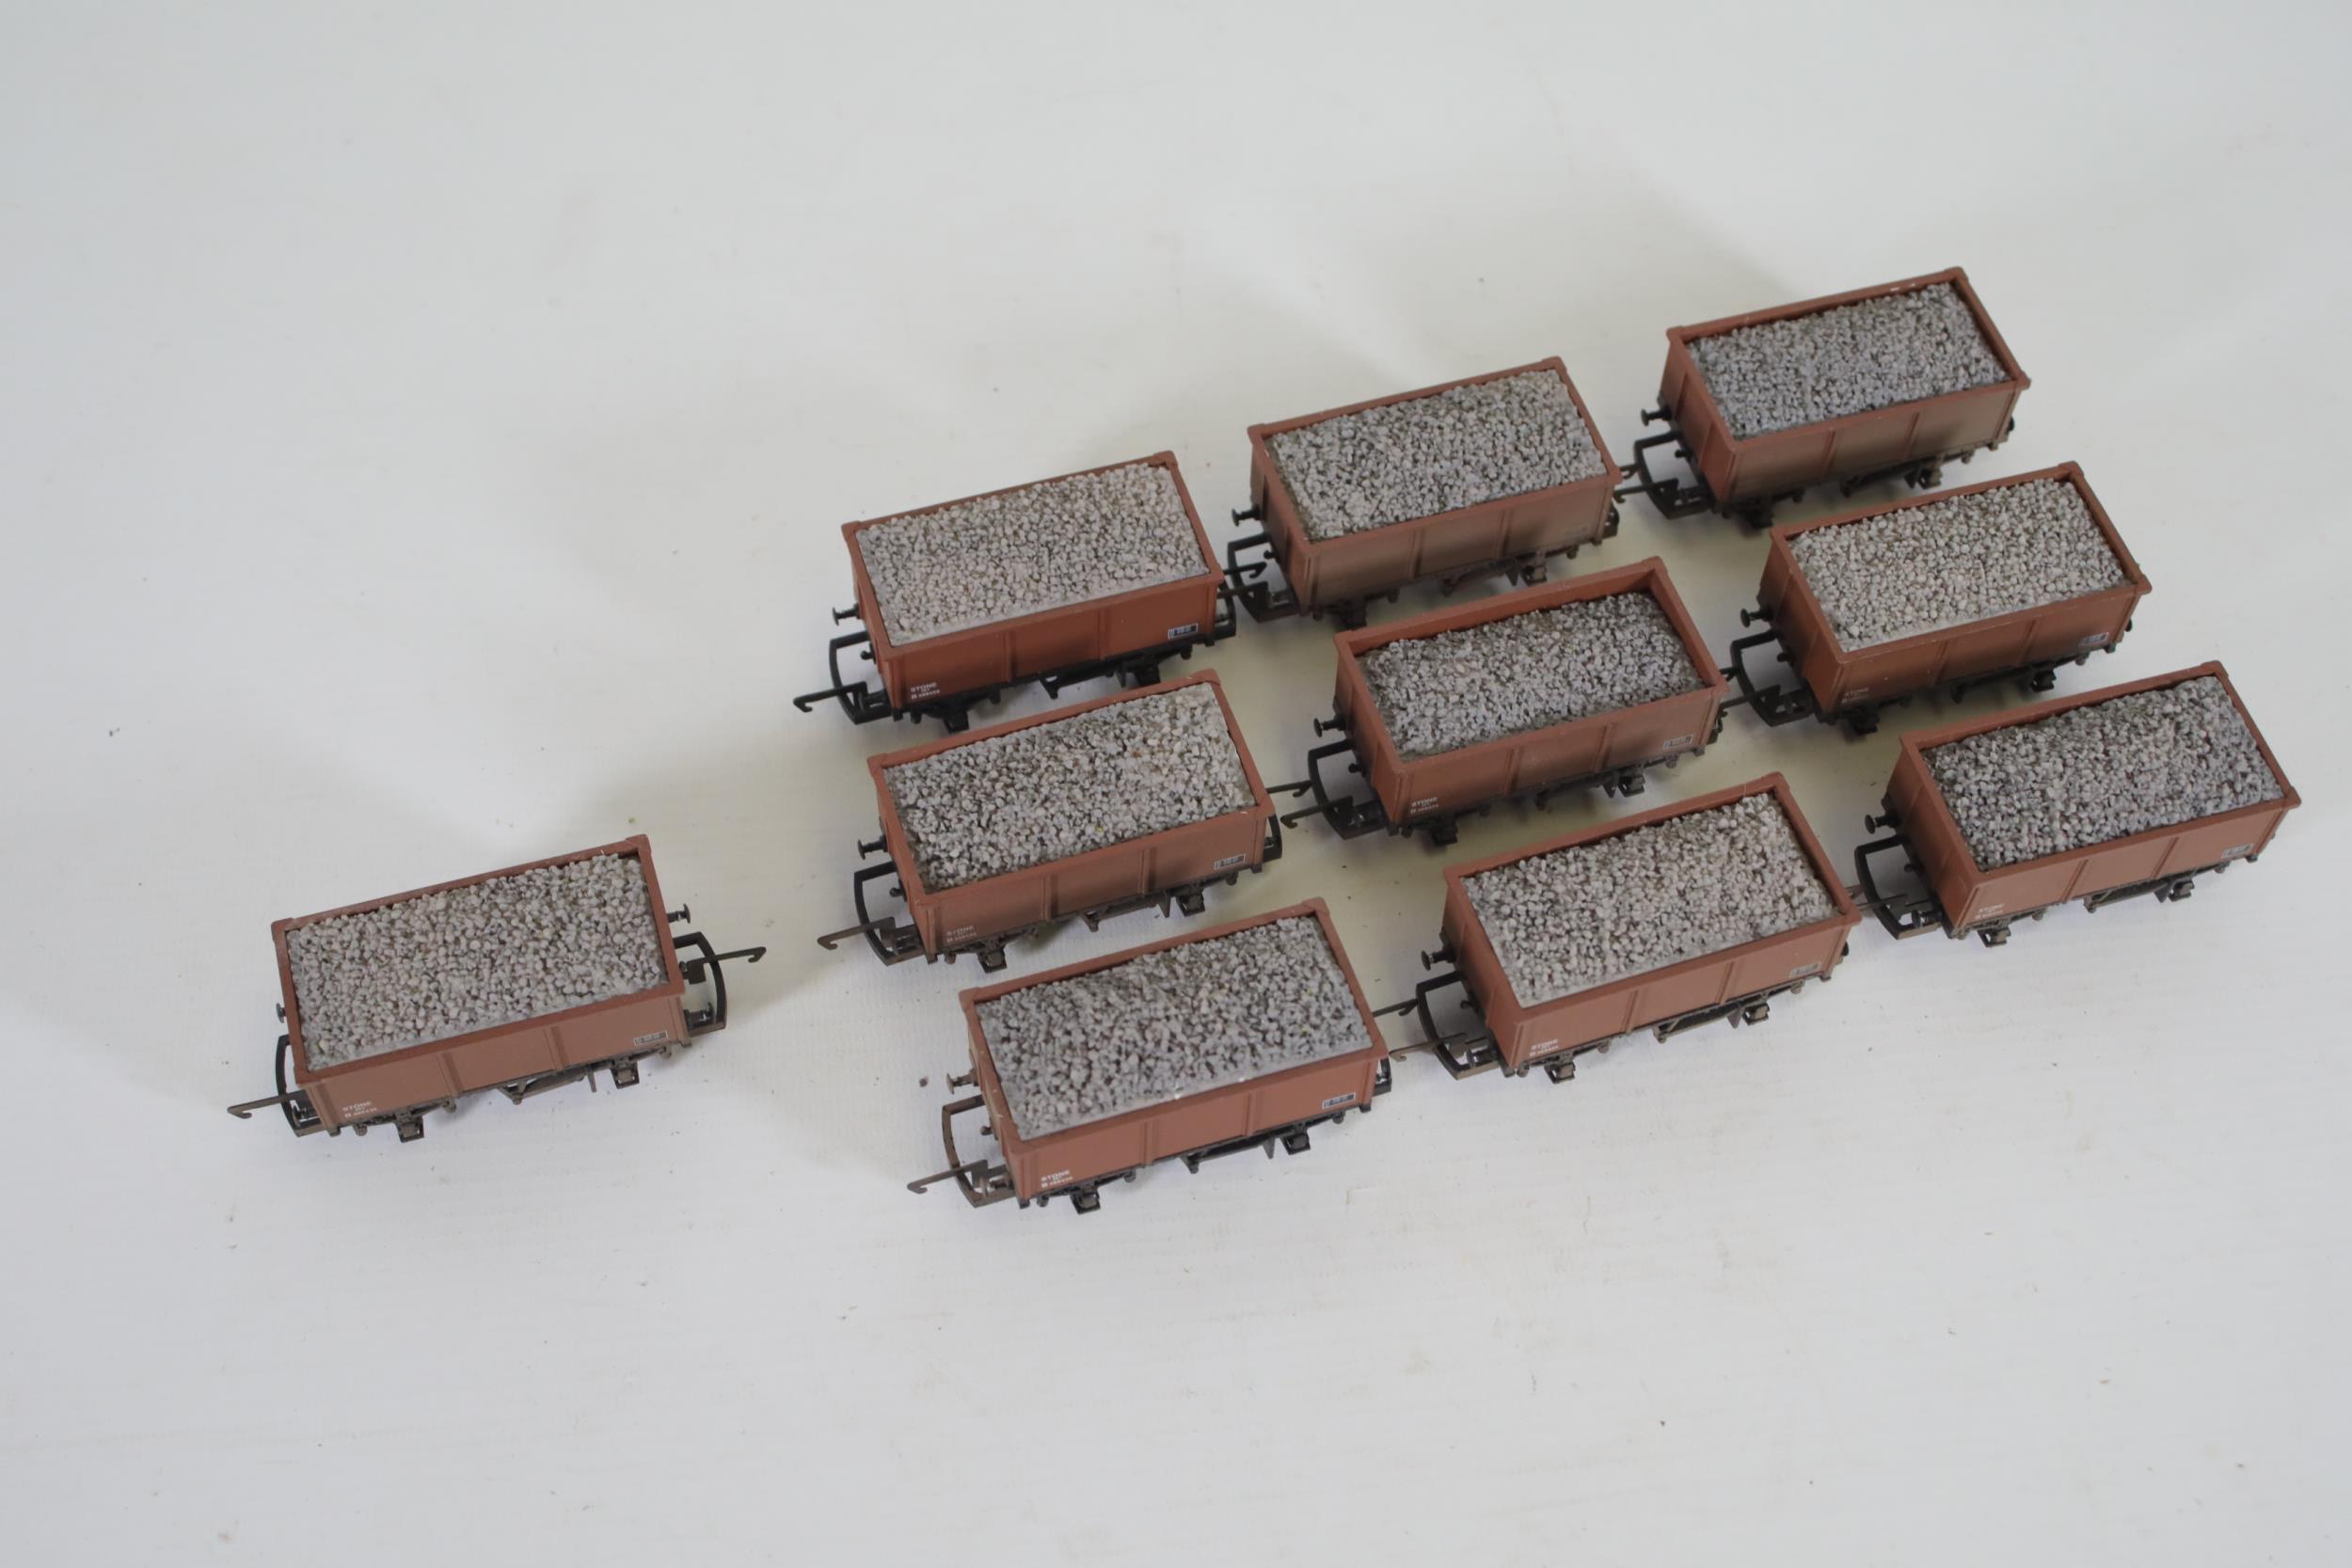 10 Hornby 26 Tonne Full Stone Carriers OO Gauge Goods Wagons - Image 2 of 8